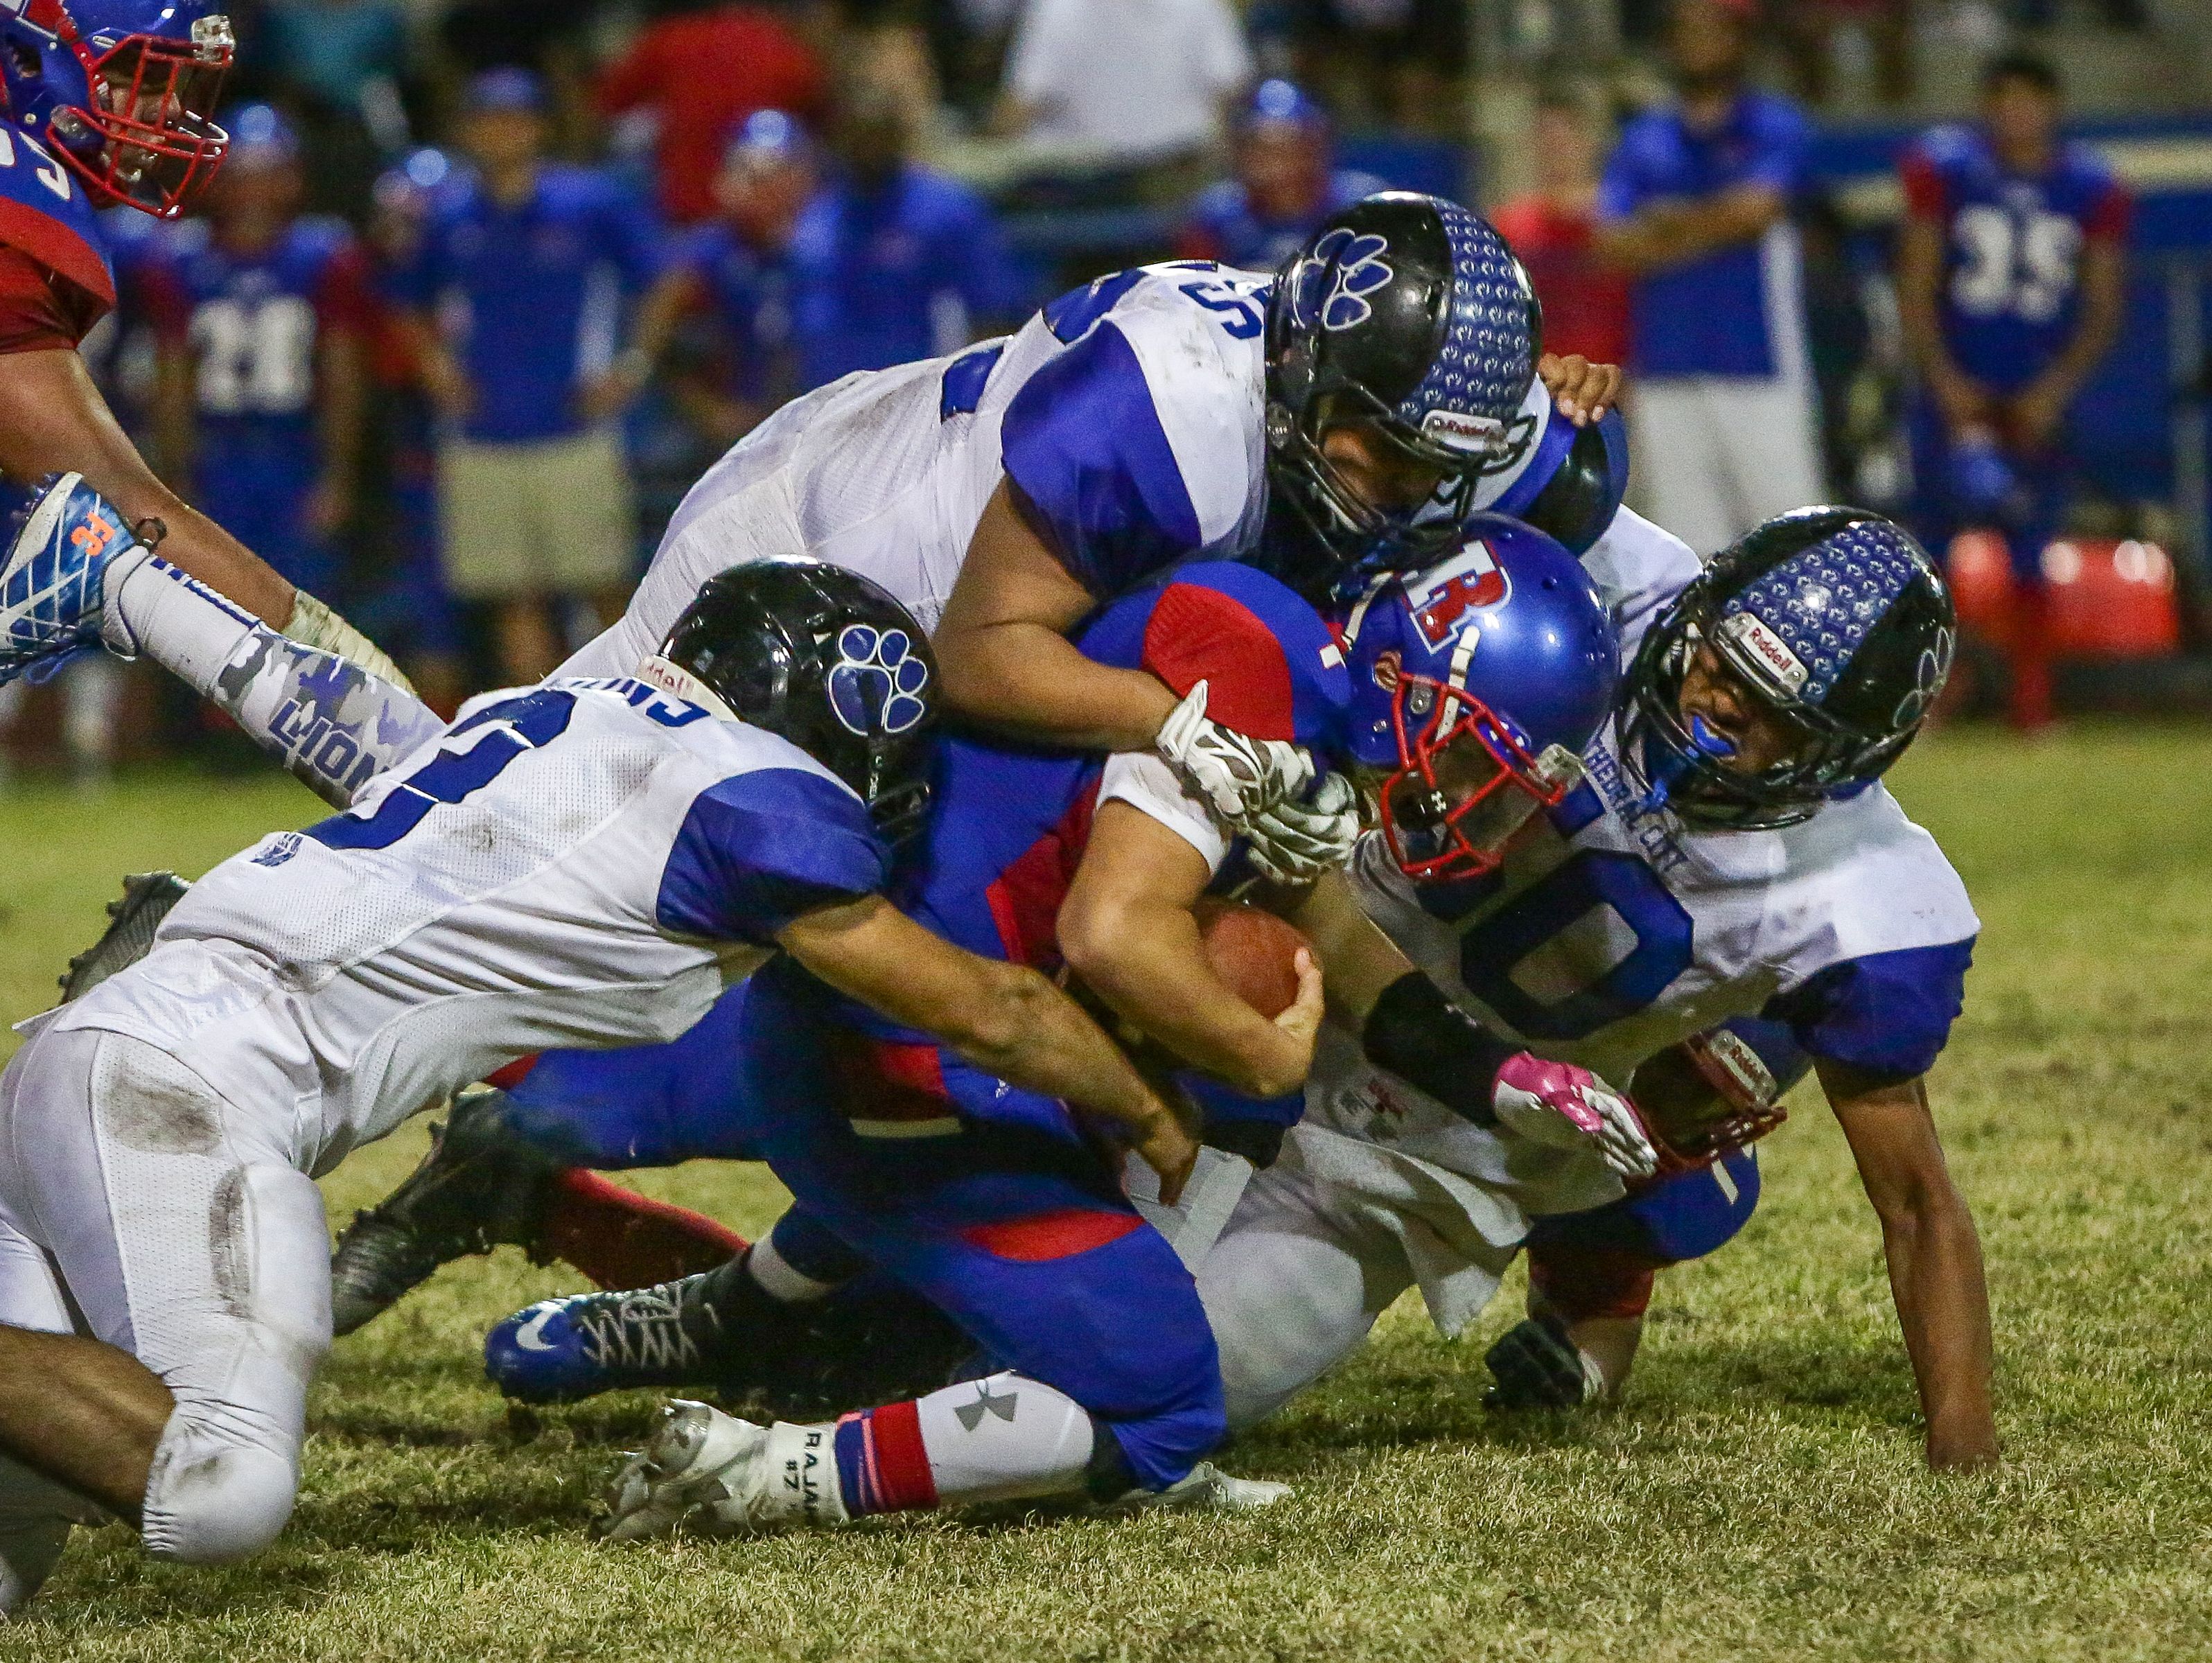 Aubuchon Martinez stopped in the middle for a loss against the Cathedral City defense.